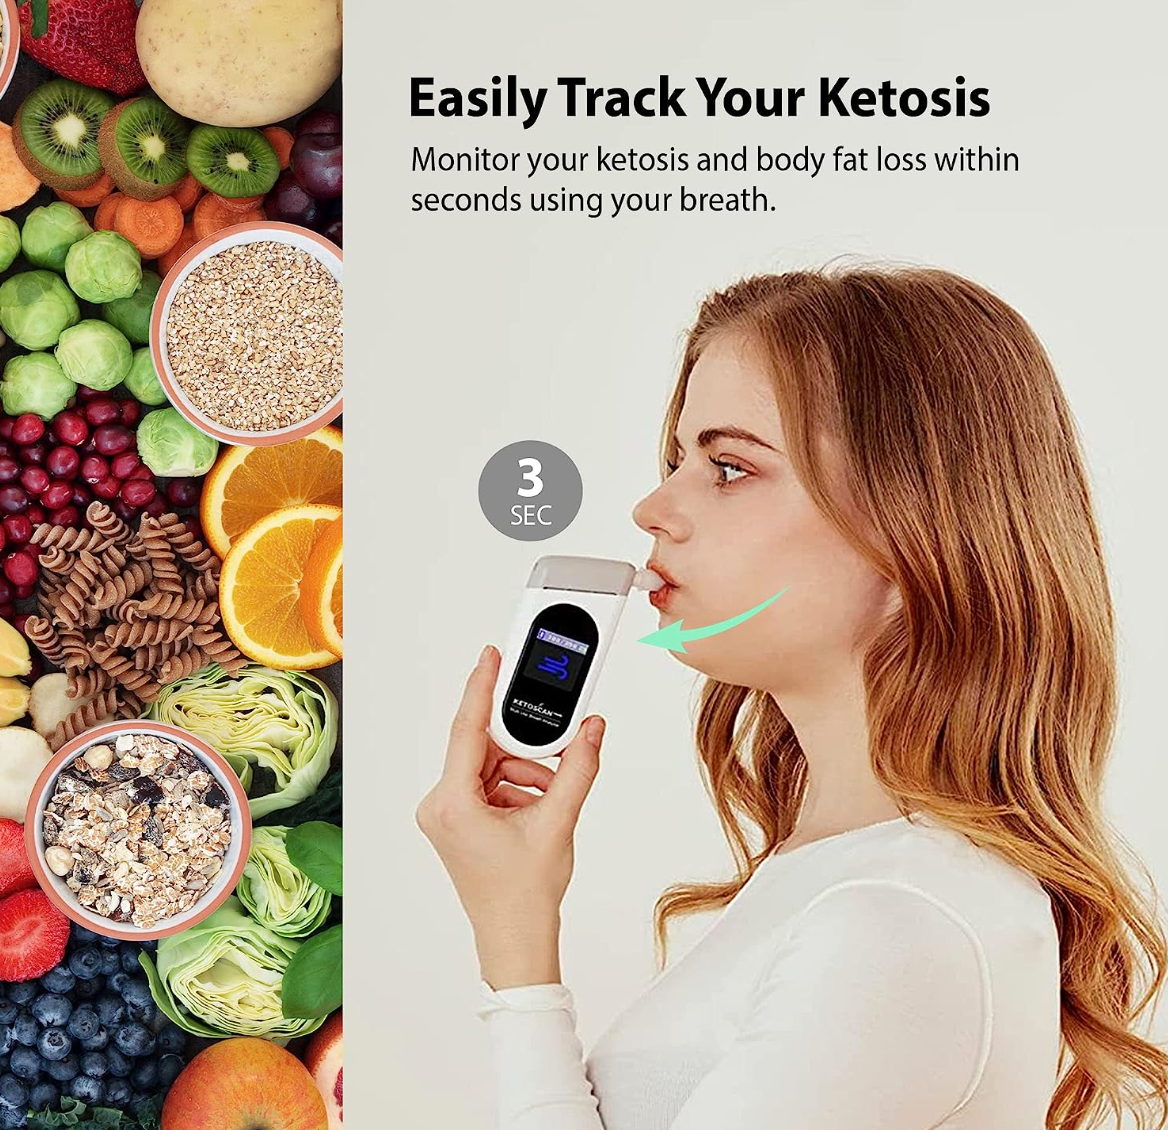 KETOSCAN Smart Breath Ketone Meter, Diet & Fitness Tracker | Monitor Your Fat Metabolism, Level of Ketosis on Low carb, Ketogenic or Any Nutrition & Fitness Program